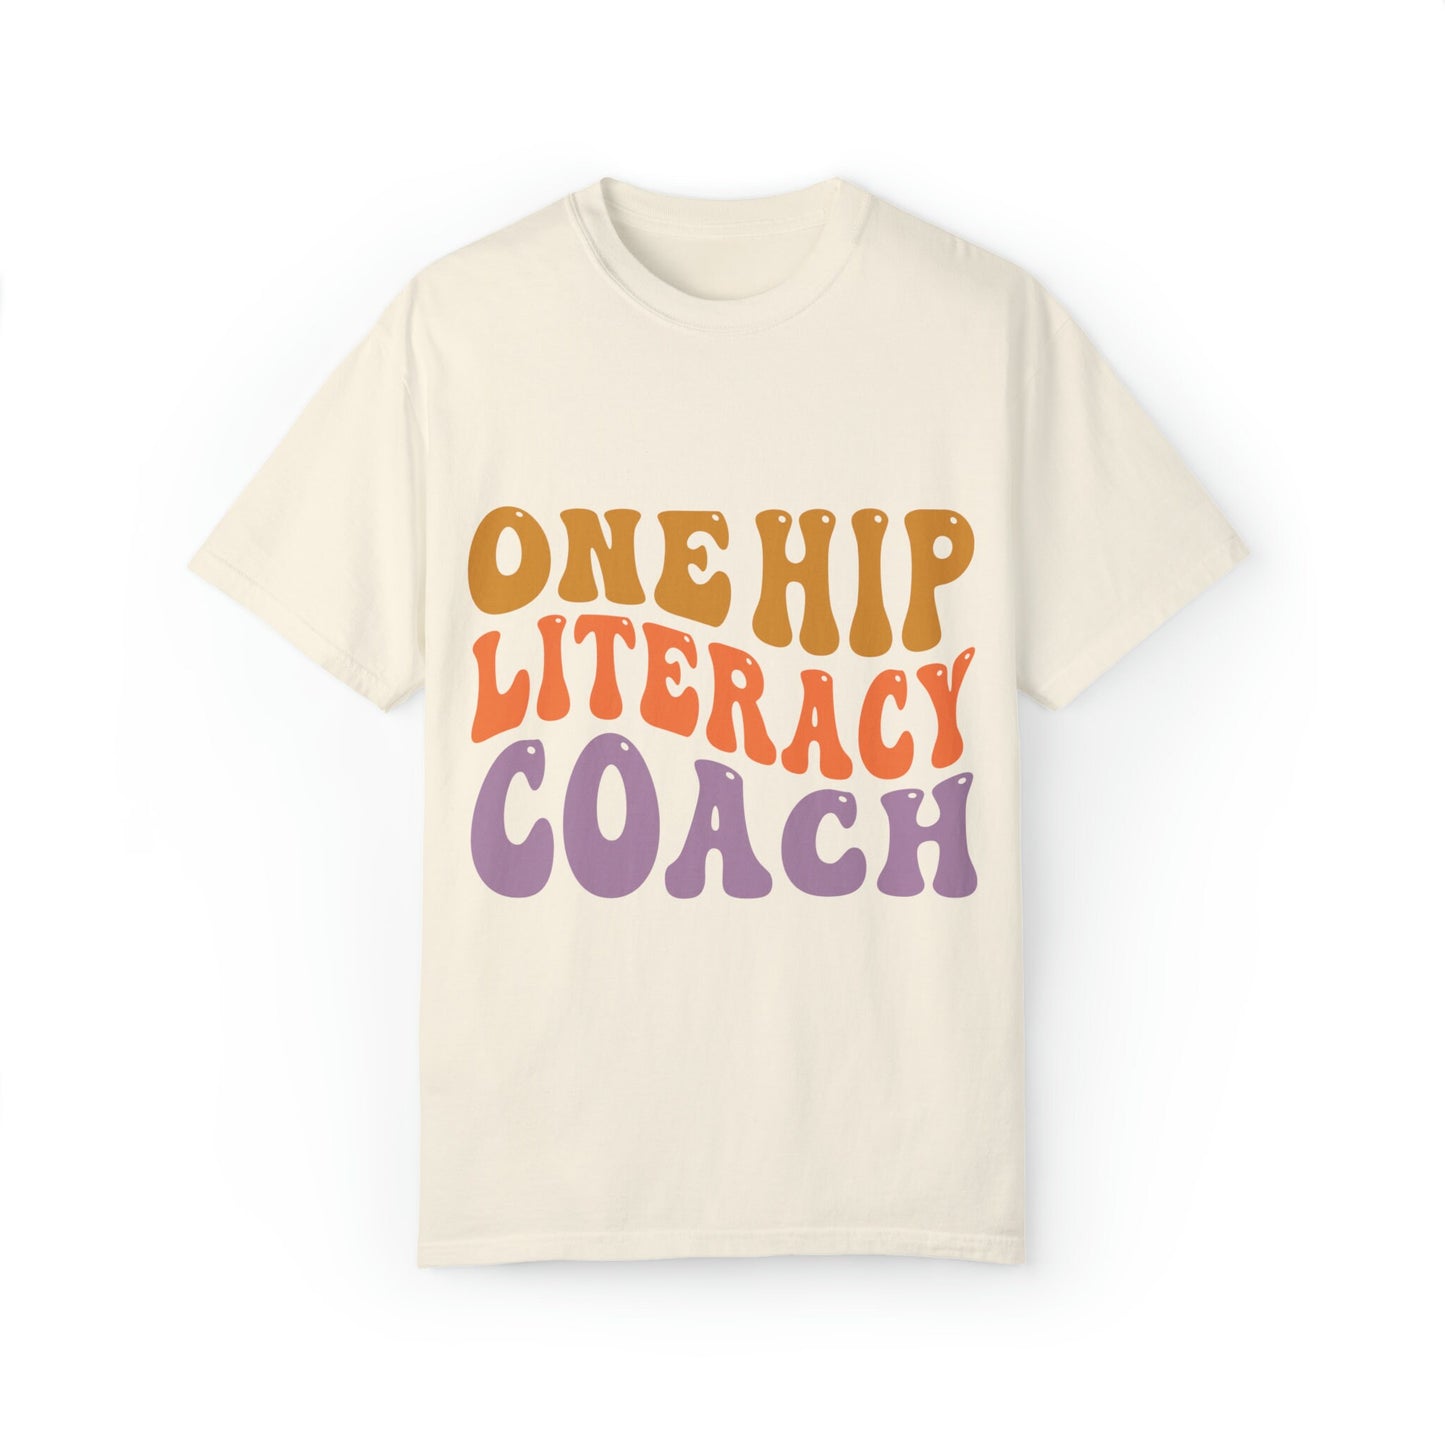 Reading Teacher Shirts: Perfect Librarian Gift for Book Lovers and Literacy Enthusiasts